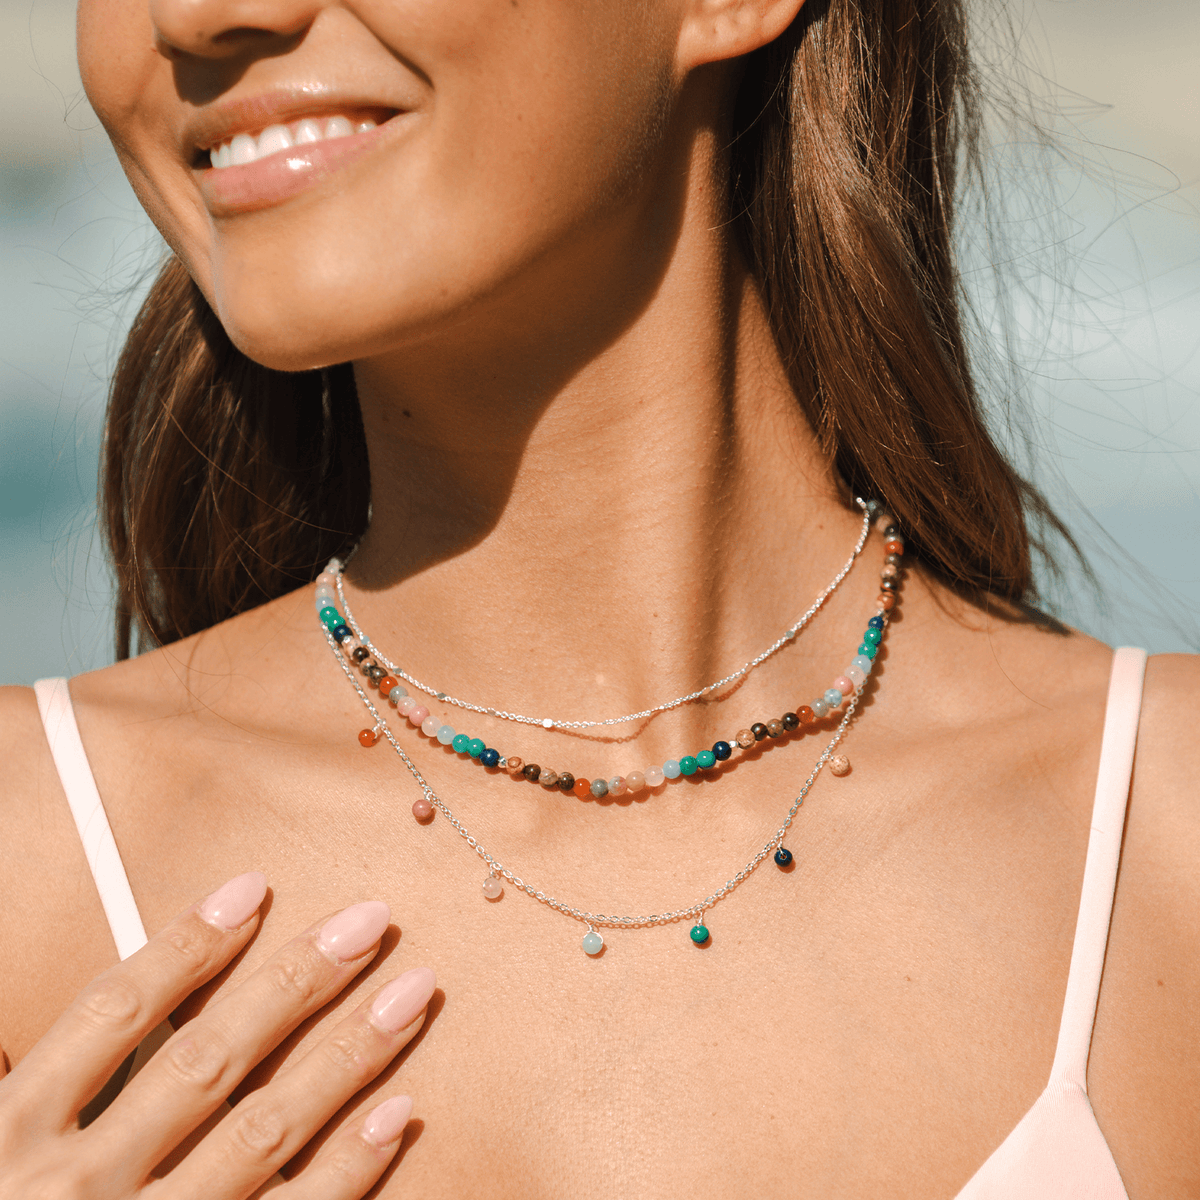 Model wearing a three necklace stack. One is a dewdrop charm style with multicolored beads and a silver chain, the other is a 4mm multicolor bead necklace and the last is a dainty silver chain necklace